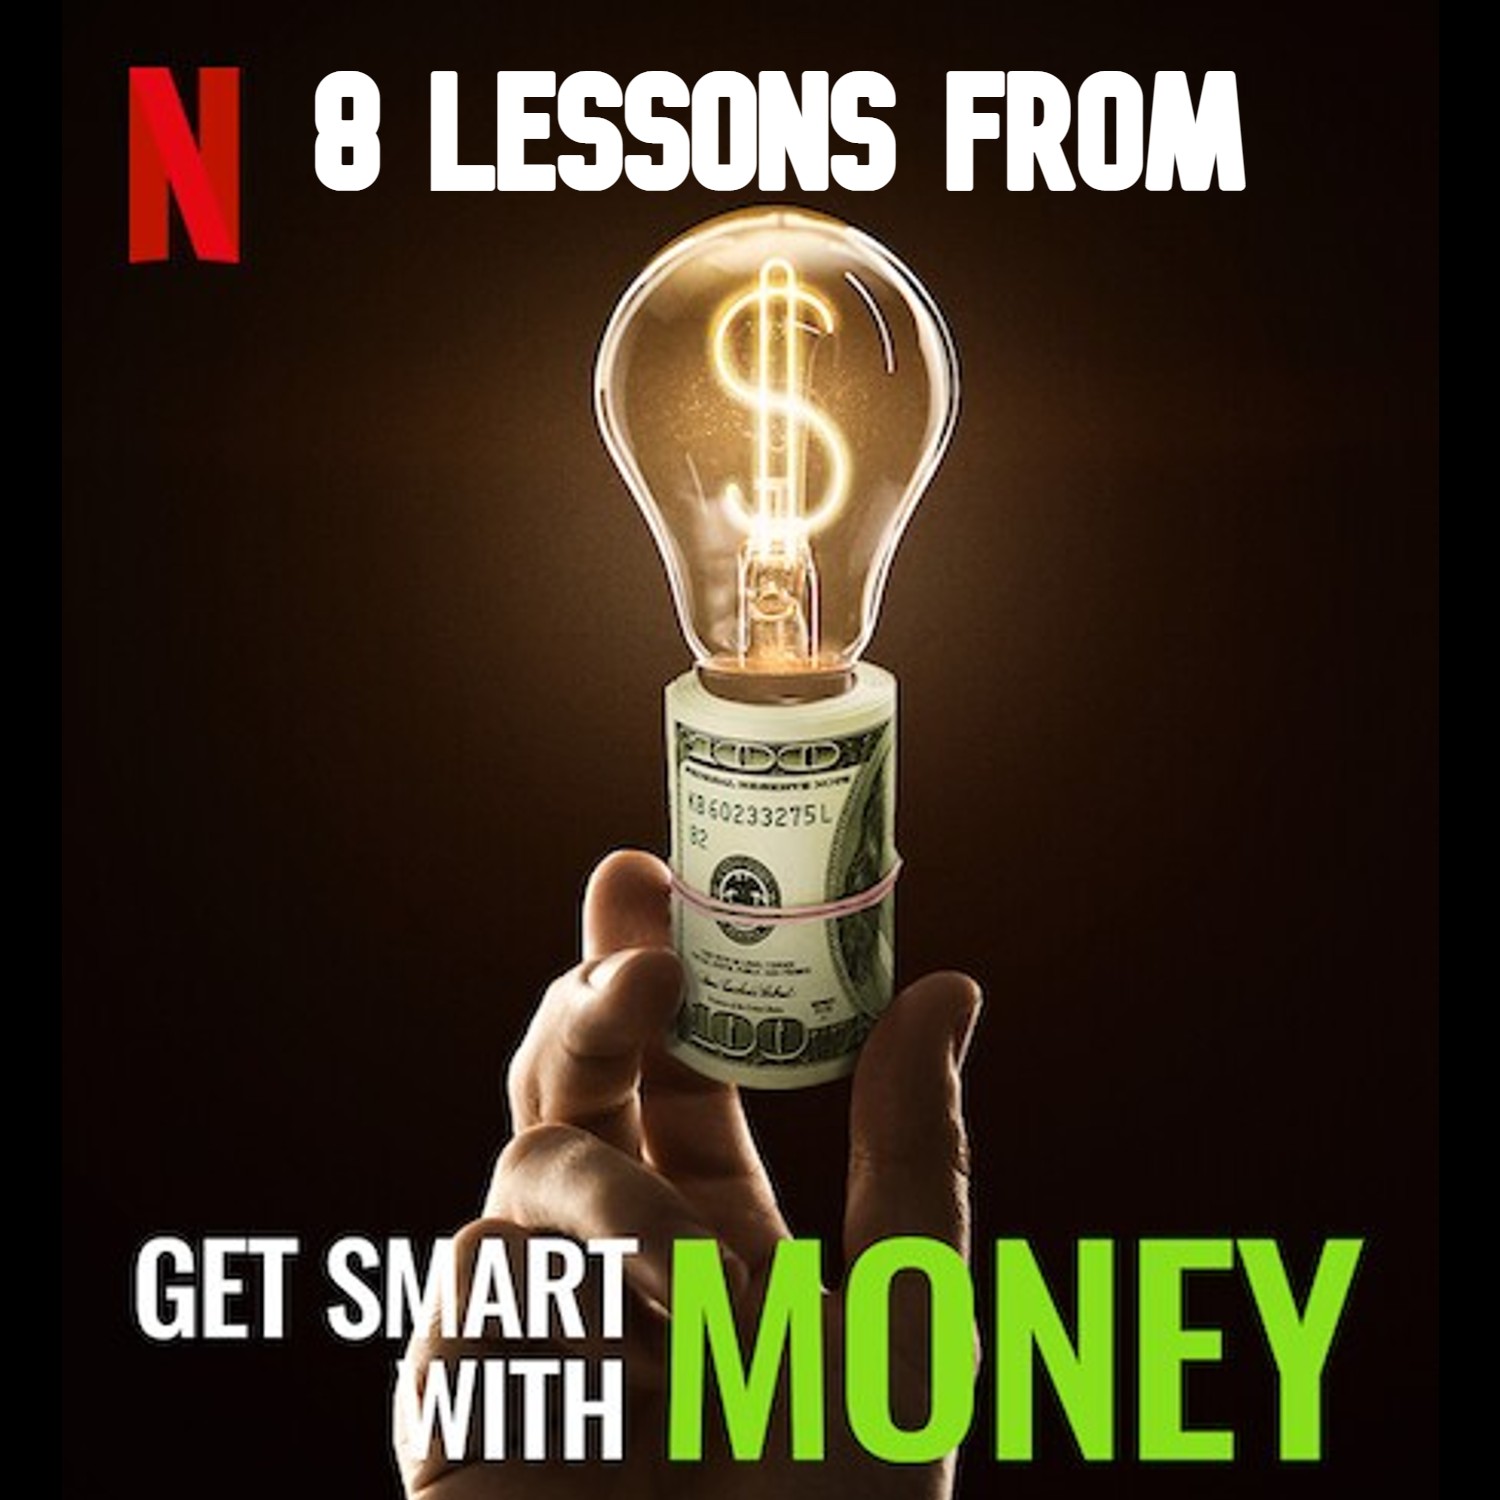 8 Lessons from “Get Smart with Money”